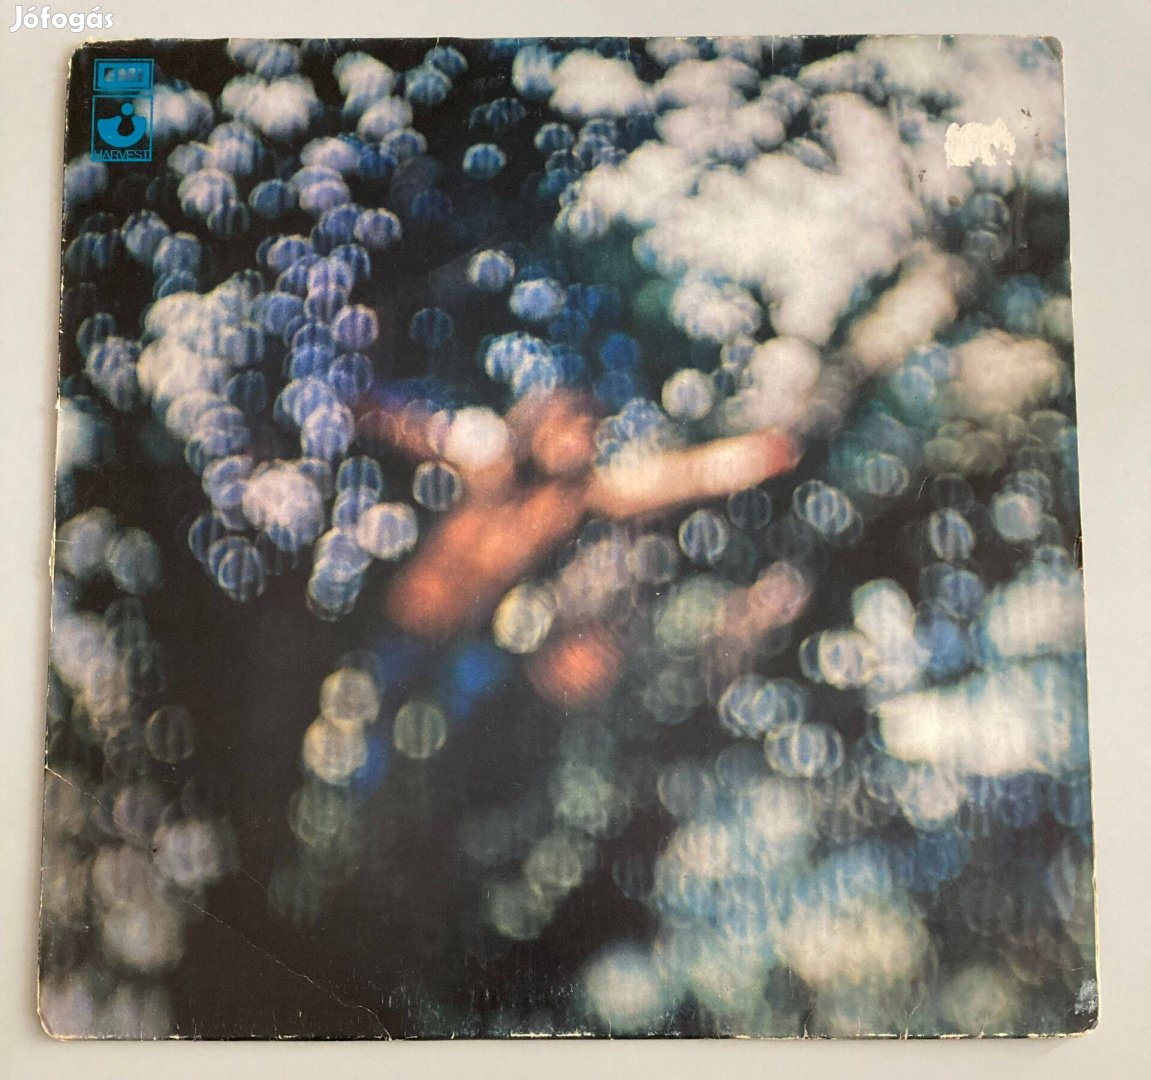 Pink Floyd - Obscured by Clouds (német, 1972)